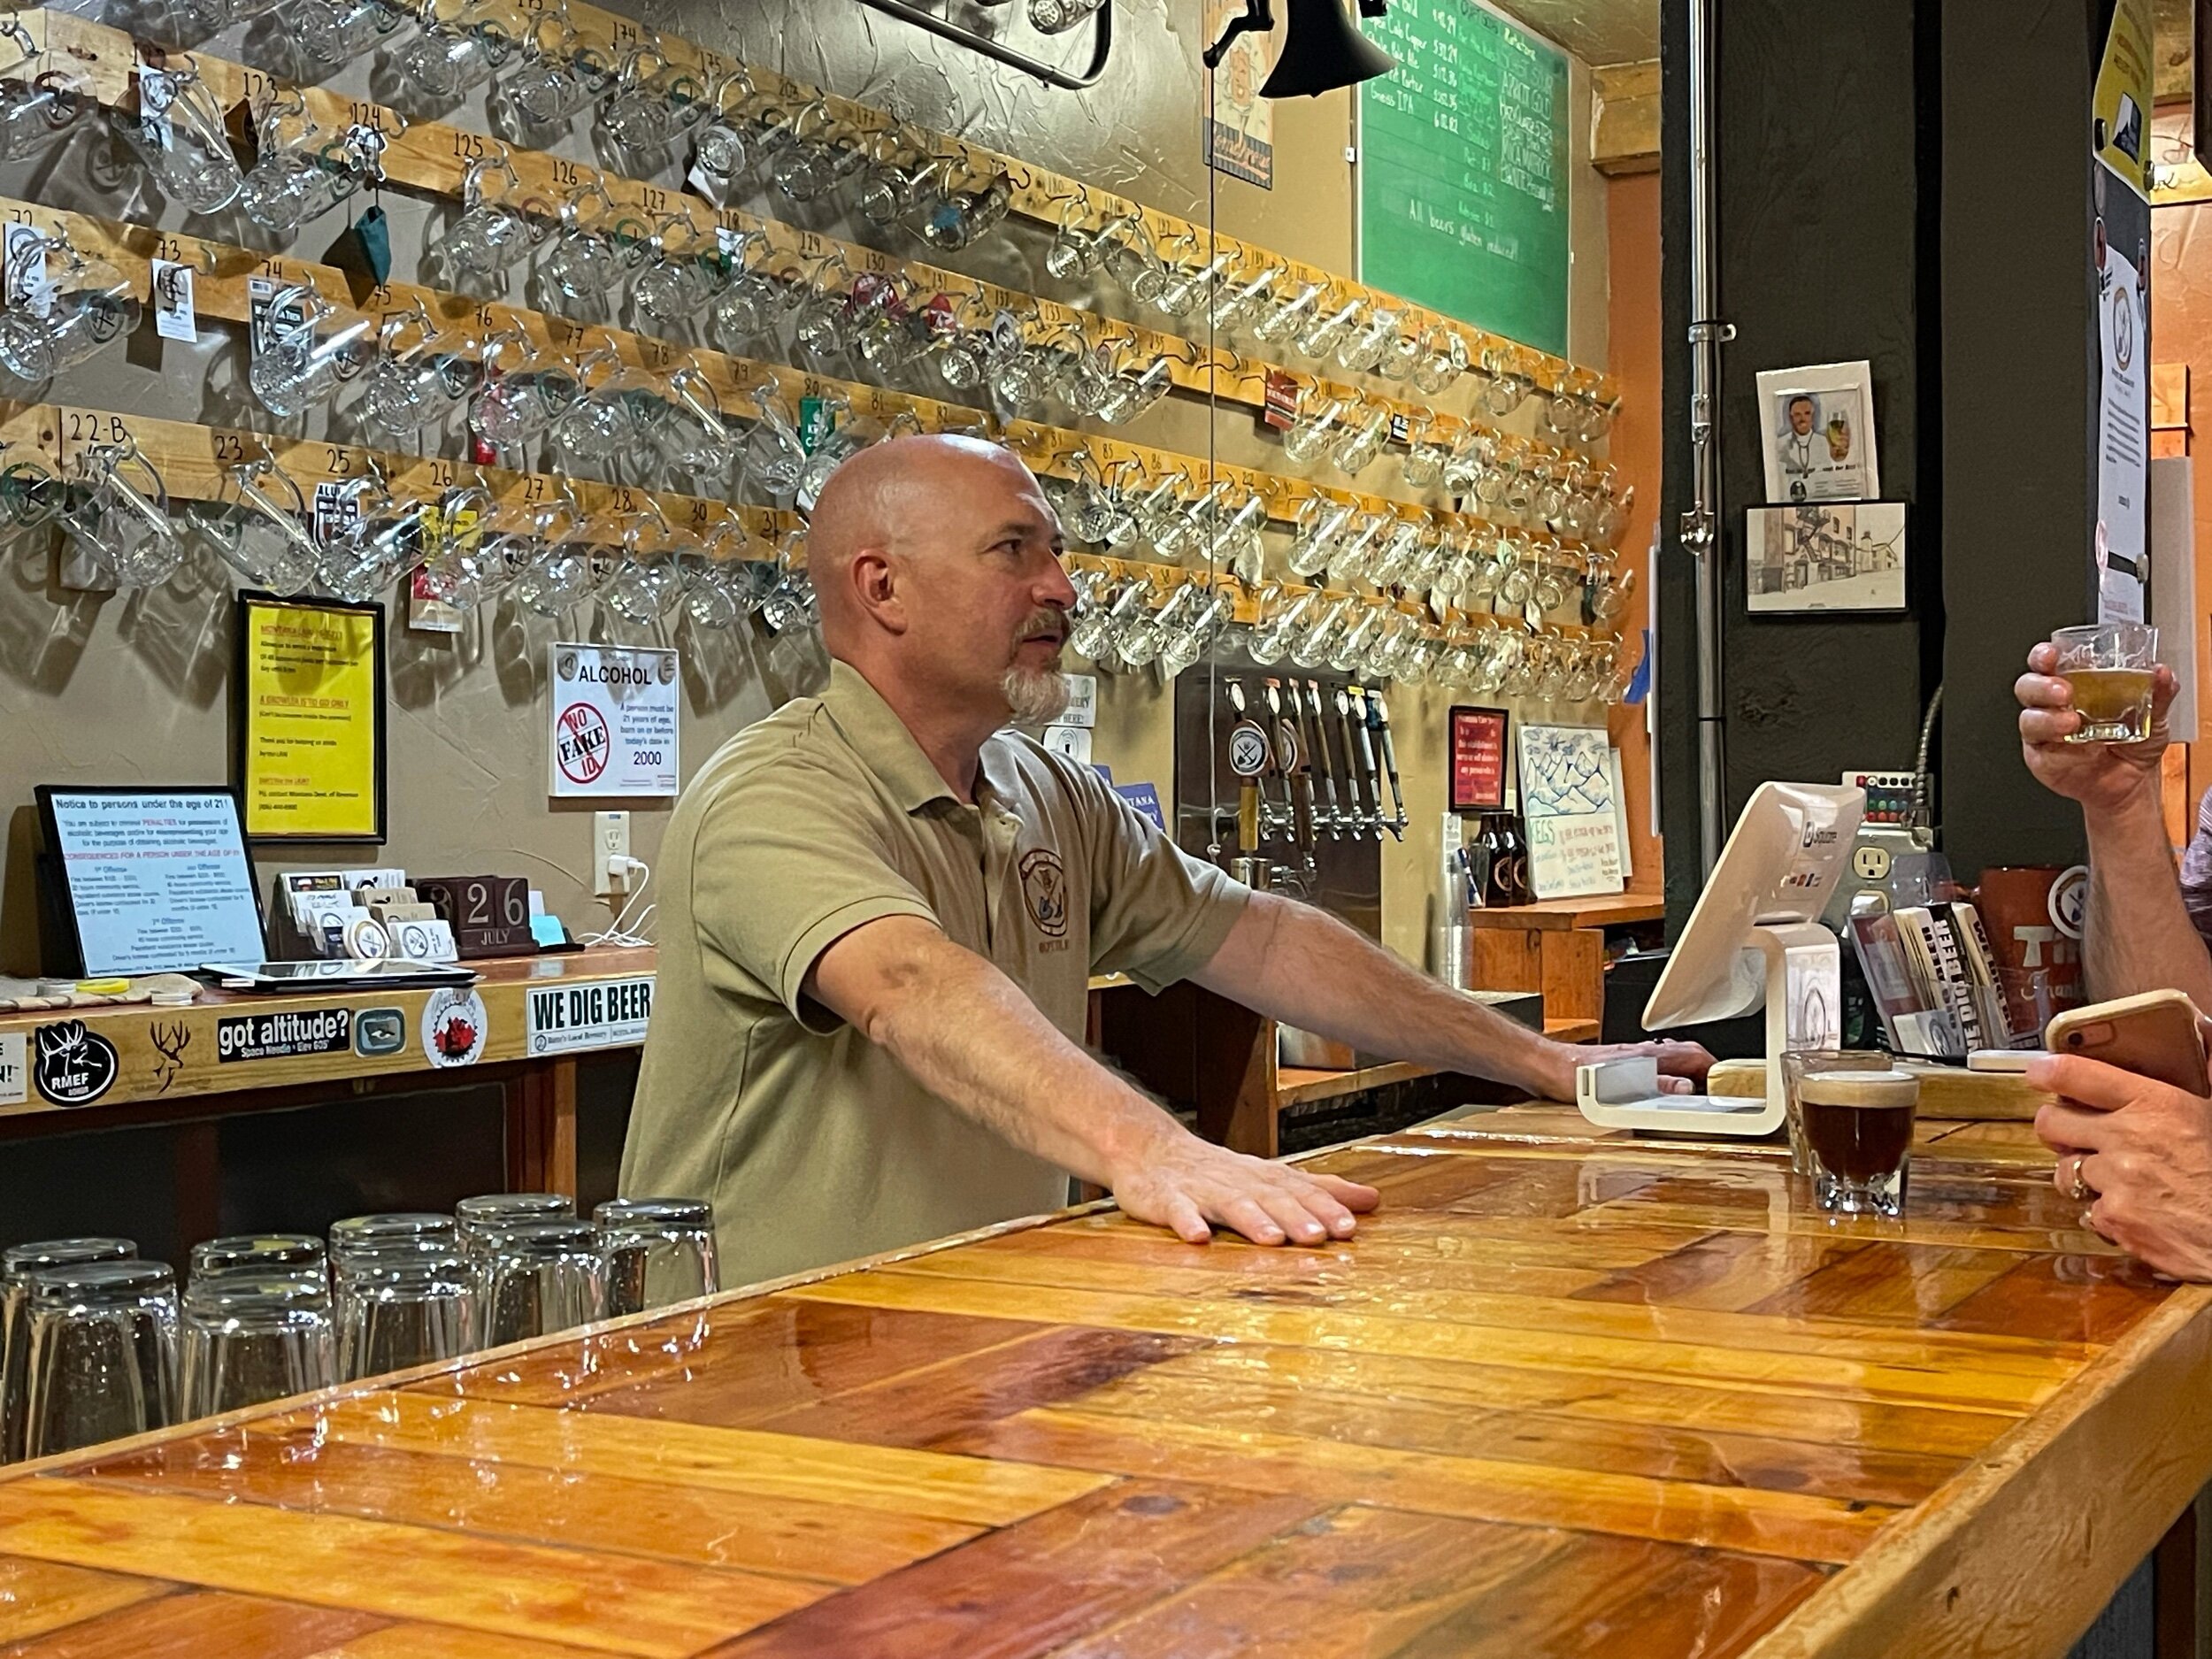  This is Chuck, the owner of  Quarry Brewery . With great pride he told us more about  the town of Butte and explained his Mug Club to us. On the wall are the mugs of 200 of his best patrons. Each cup hangs on a numbered peg, and he knows every custo